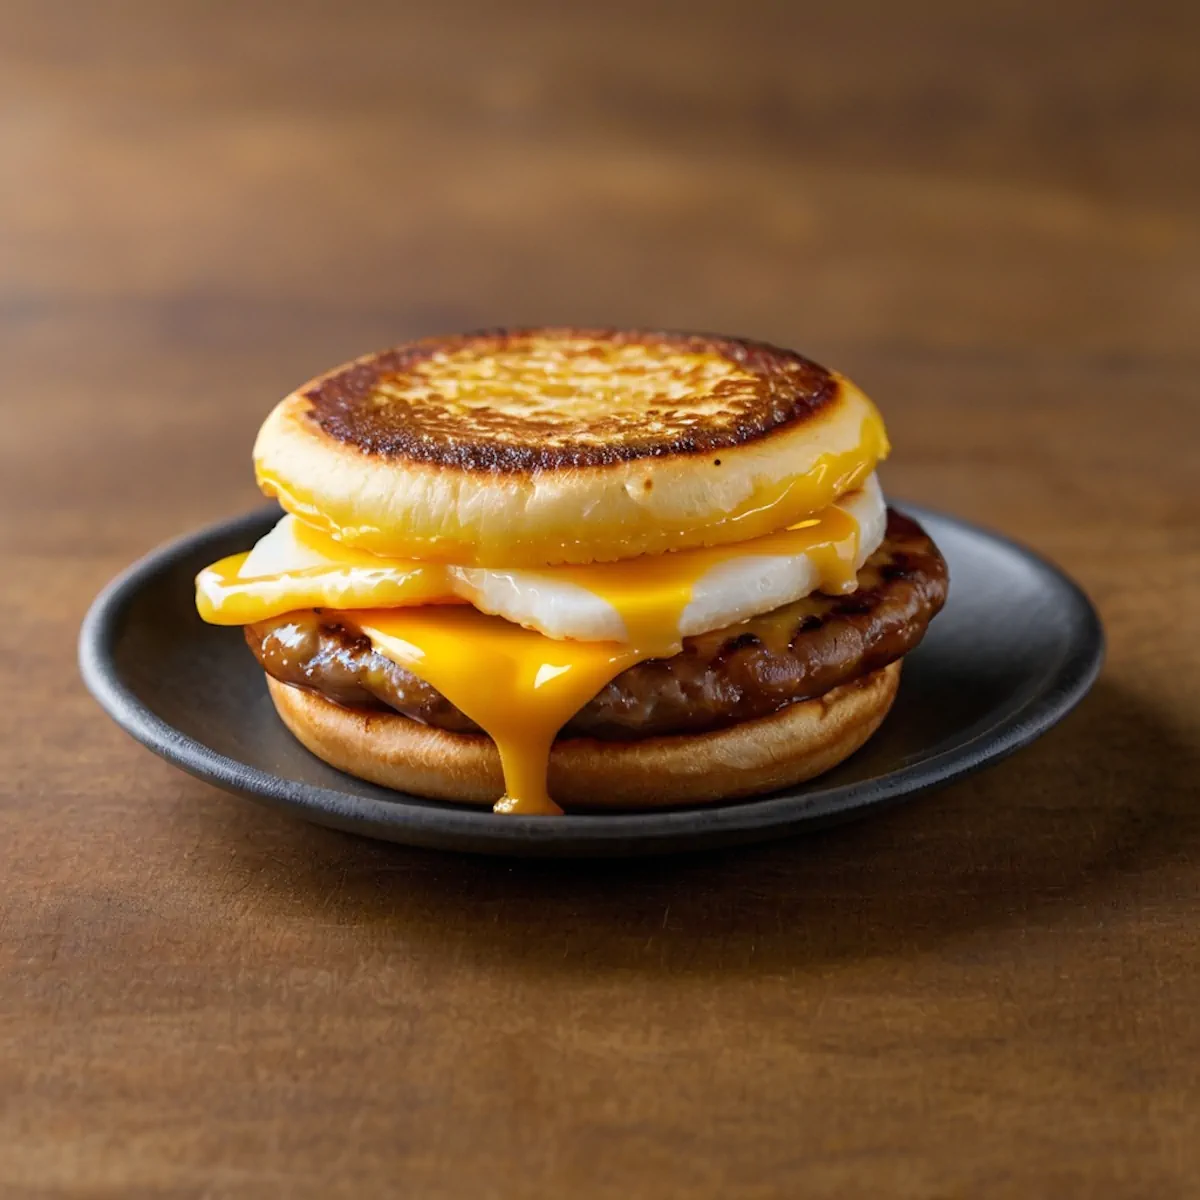 Egg mcmuffin served on a black plate.